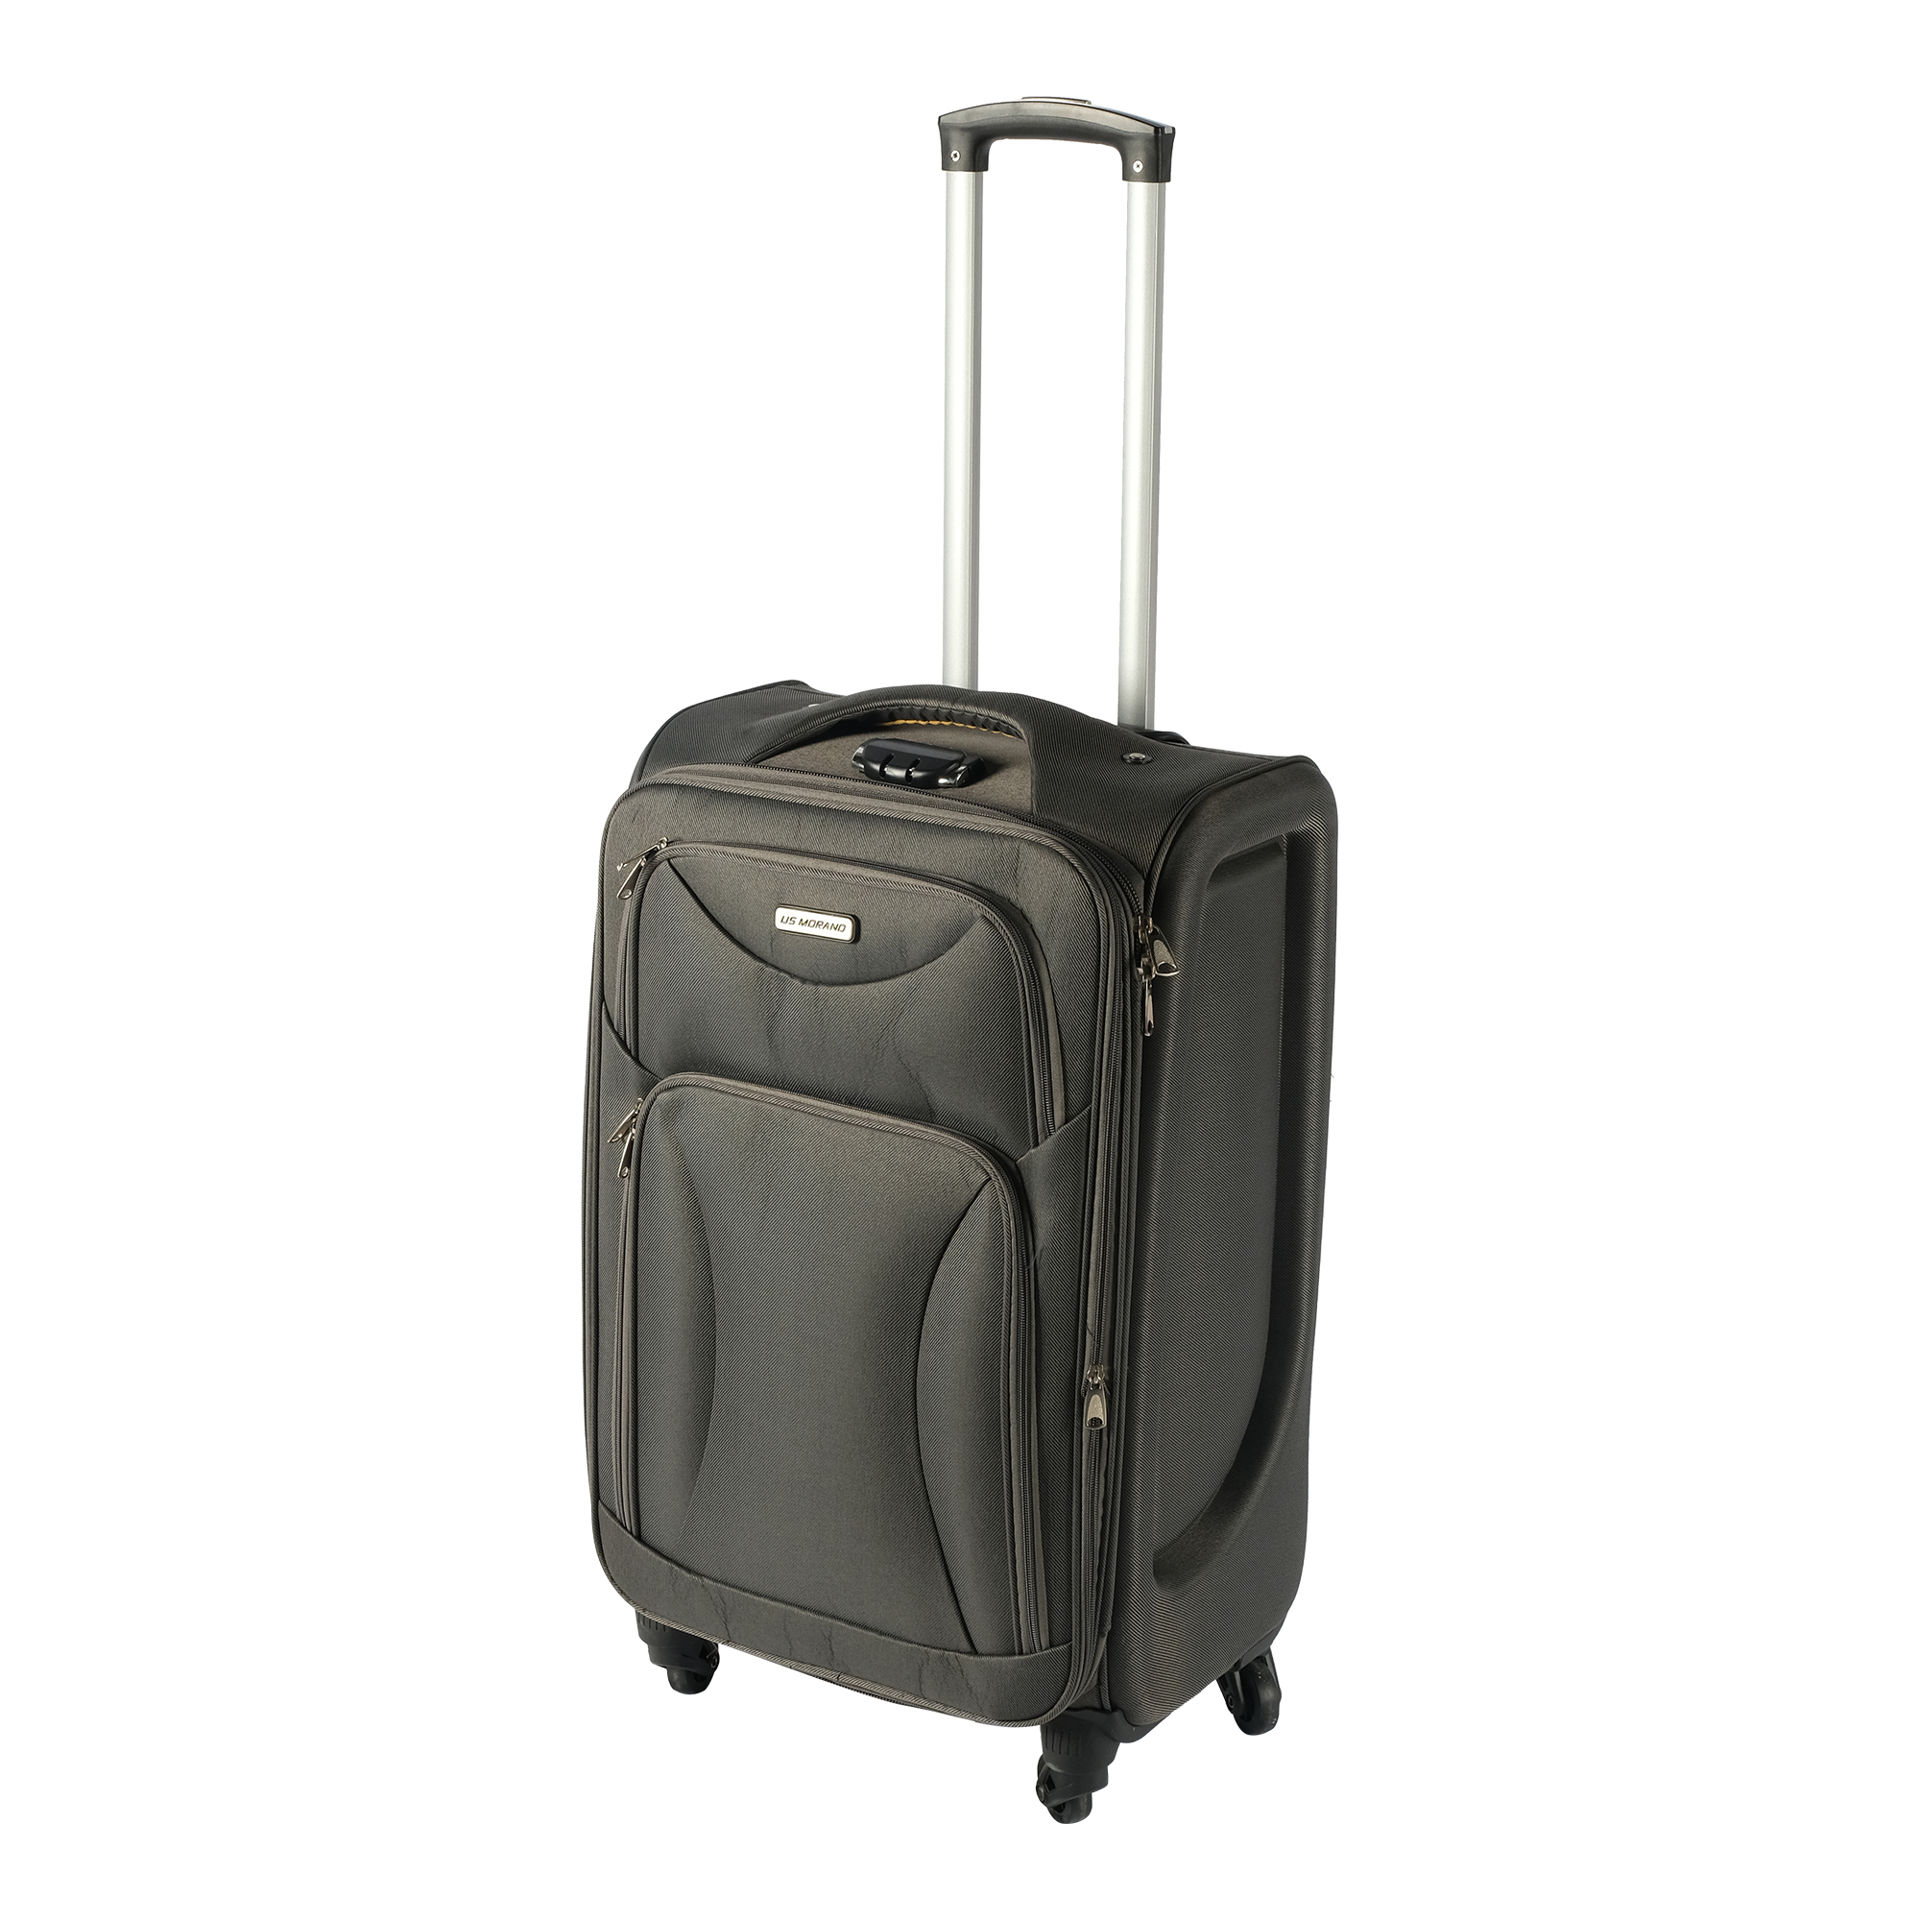 Buy Morano Luggage Hard Trolley Travel Bags 4 Pieces Set Sizes 14/20/24/28  Rose Gold Online - Shop Fashion, Accessories & Luggage on Carrefour Saudi  Arabia